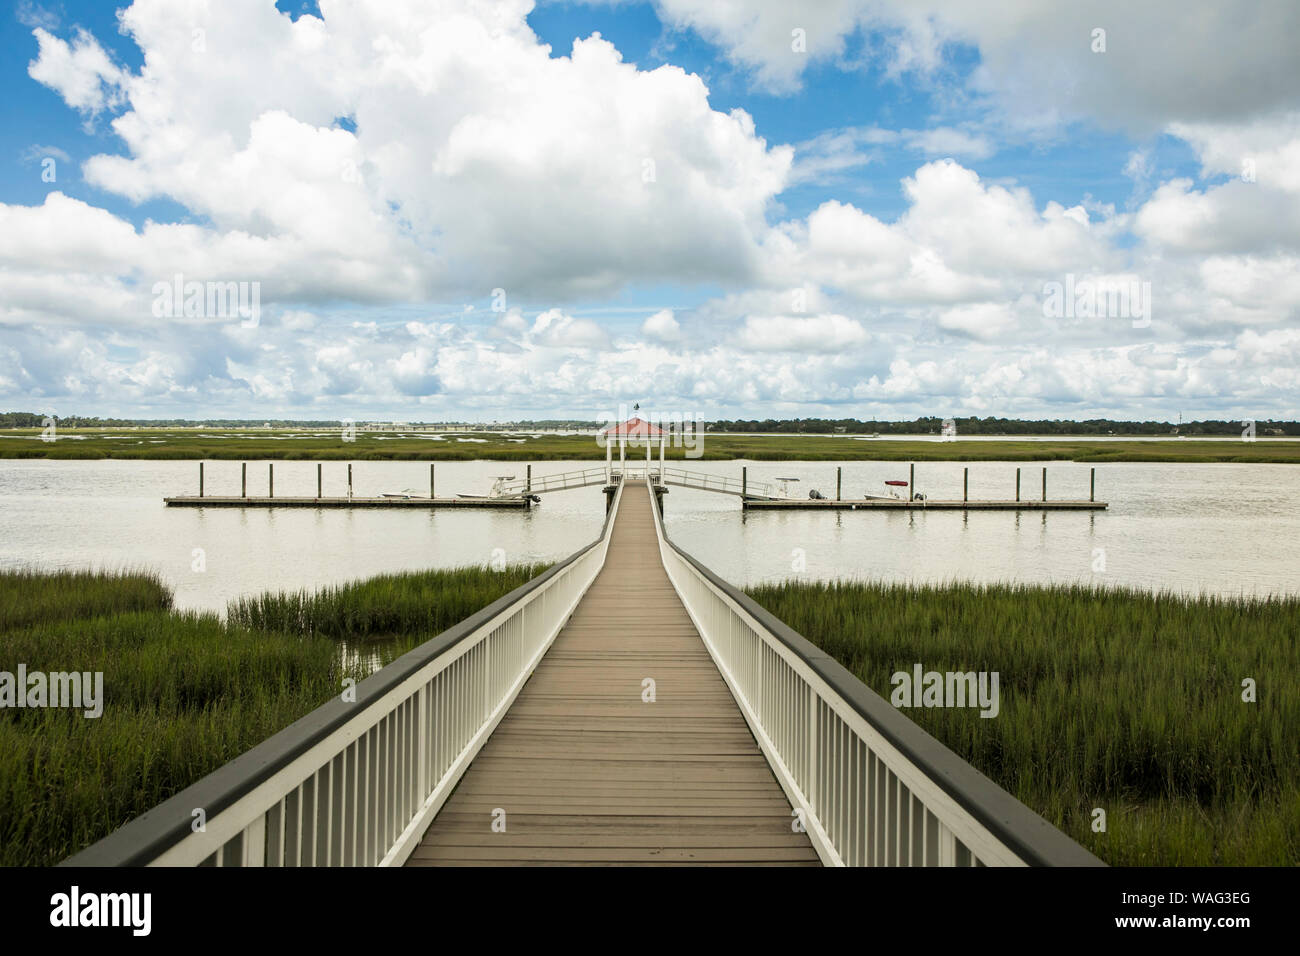 Symmetrical dock with boats on the river in Beaufort, South Carolina. Stock Photo